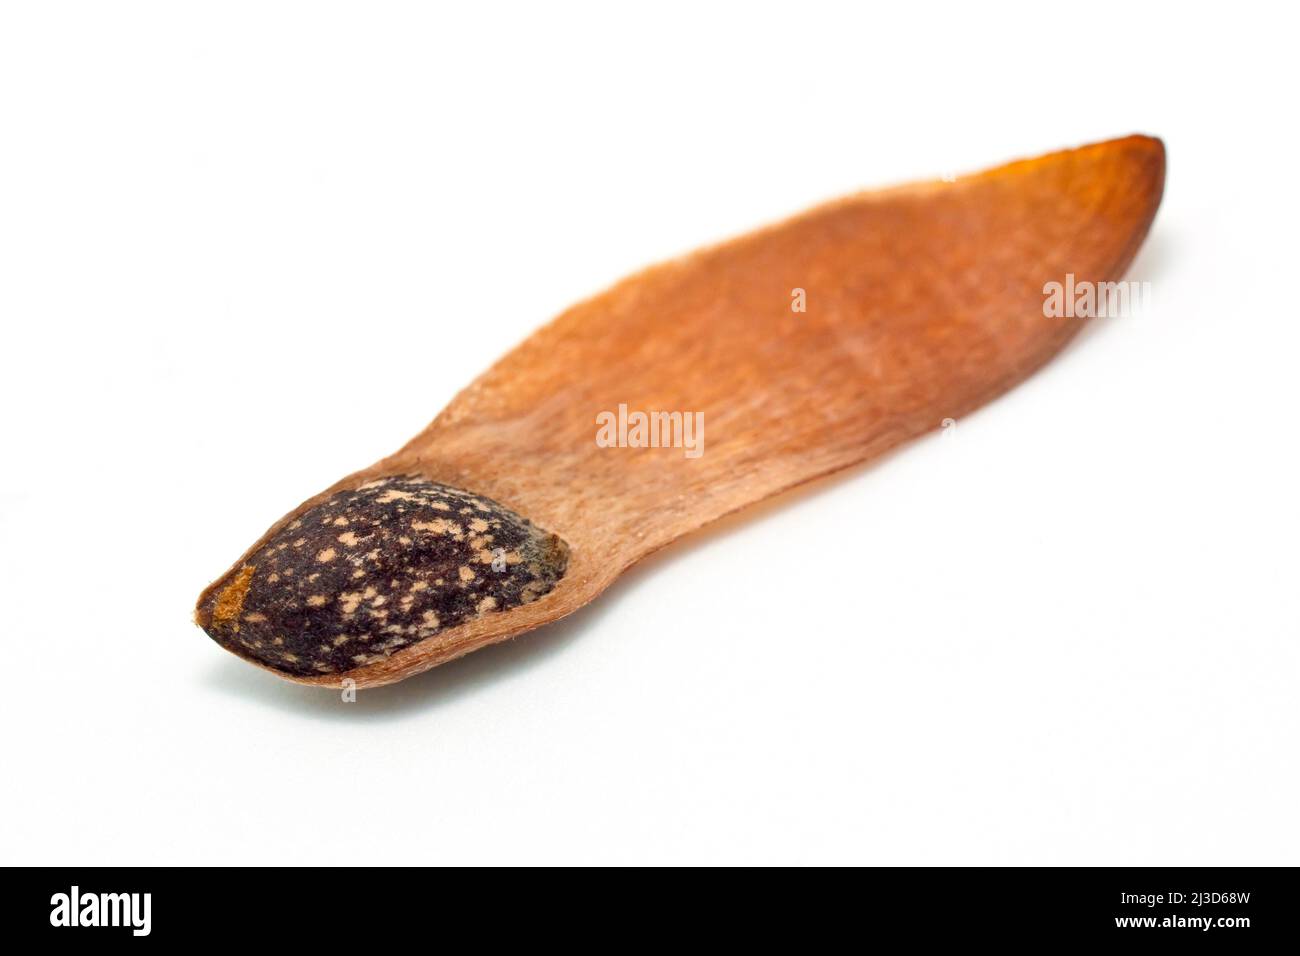 Scot's Pine (pinus sylvestris), close up of a single winged seed from the tree, isolated against a white background. Stock Photo